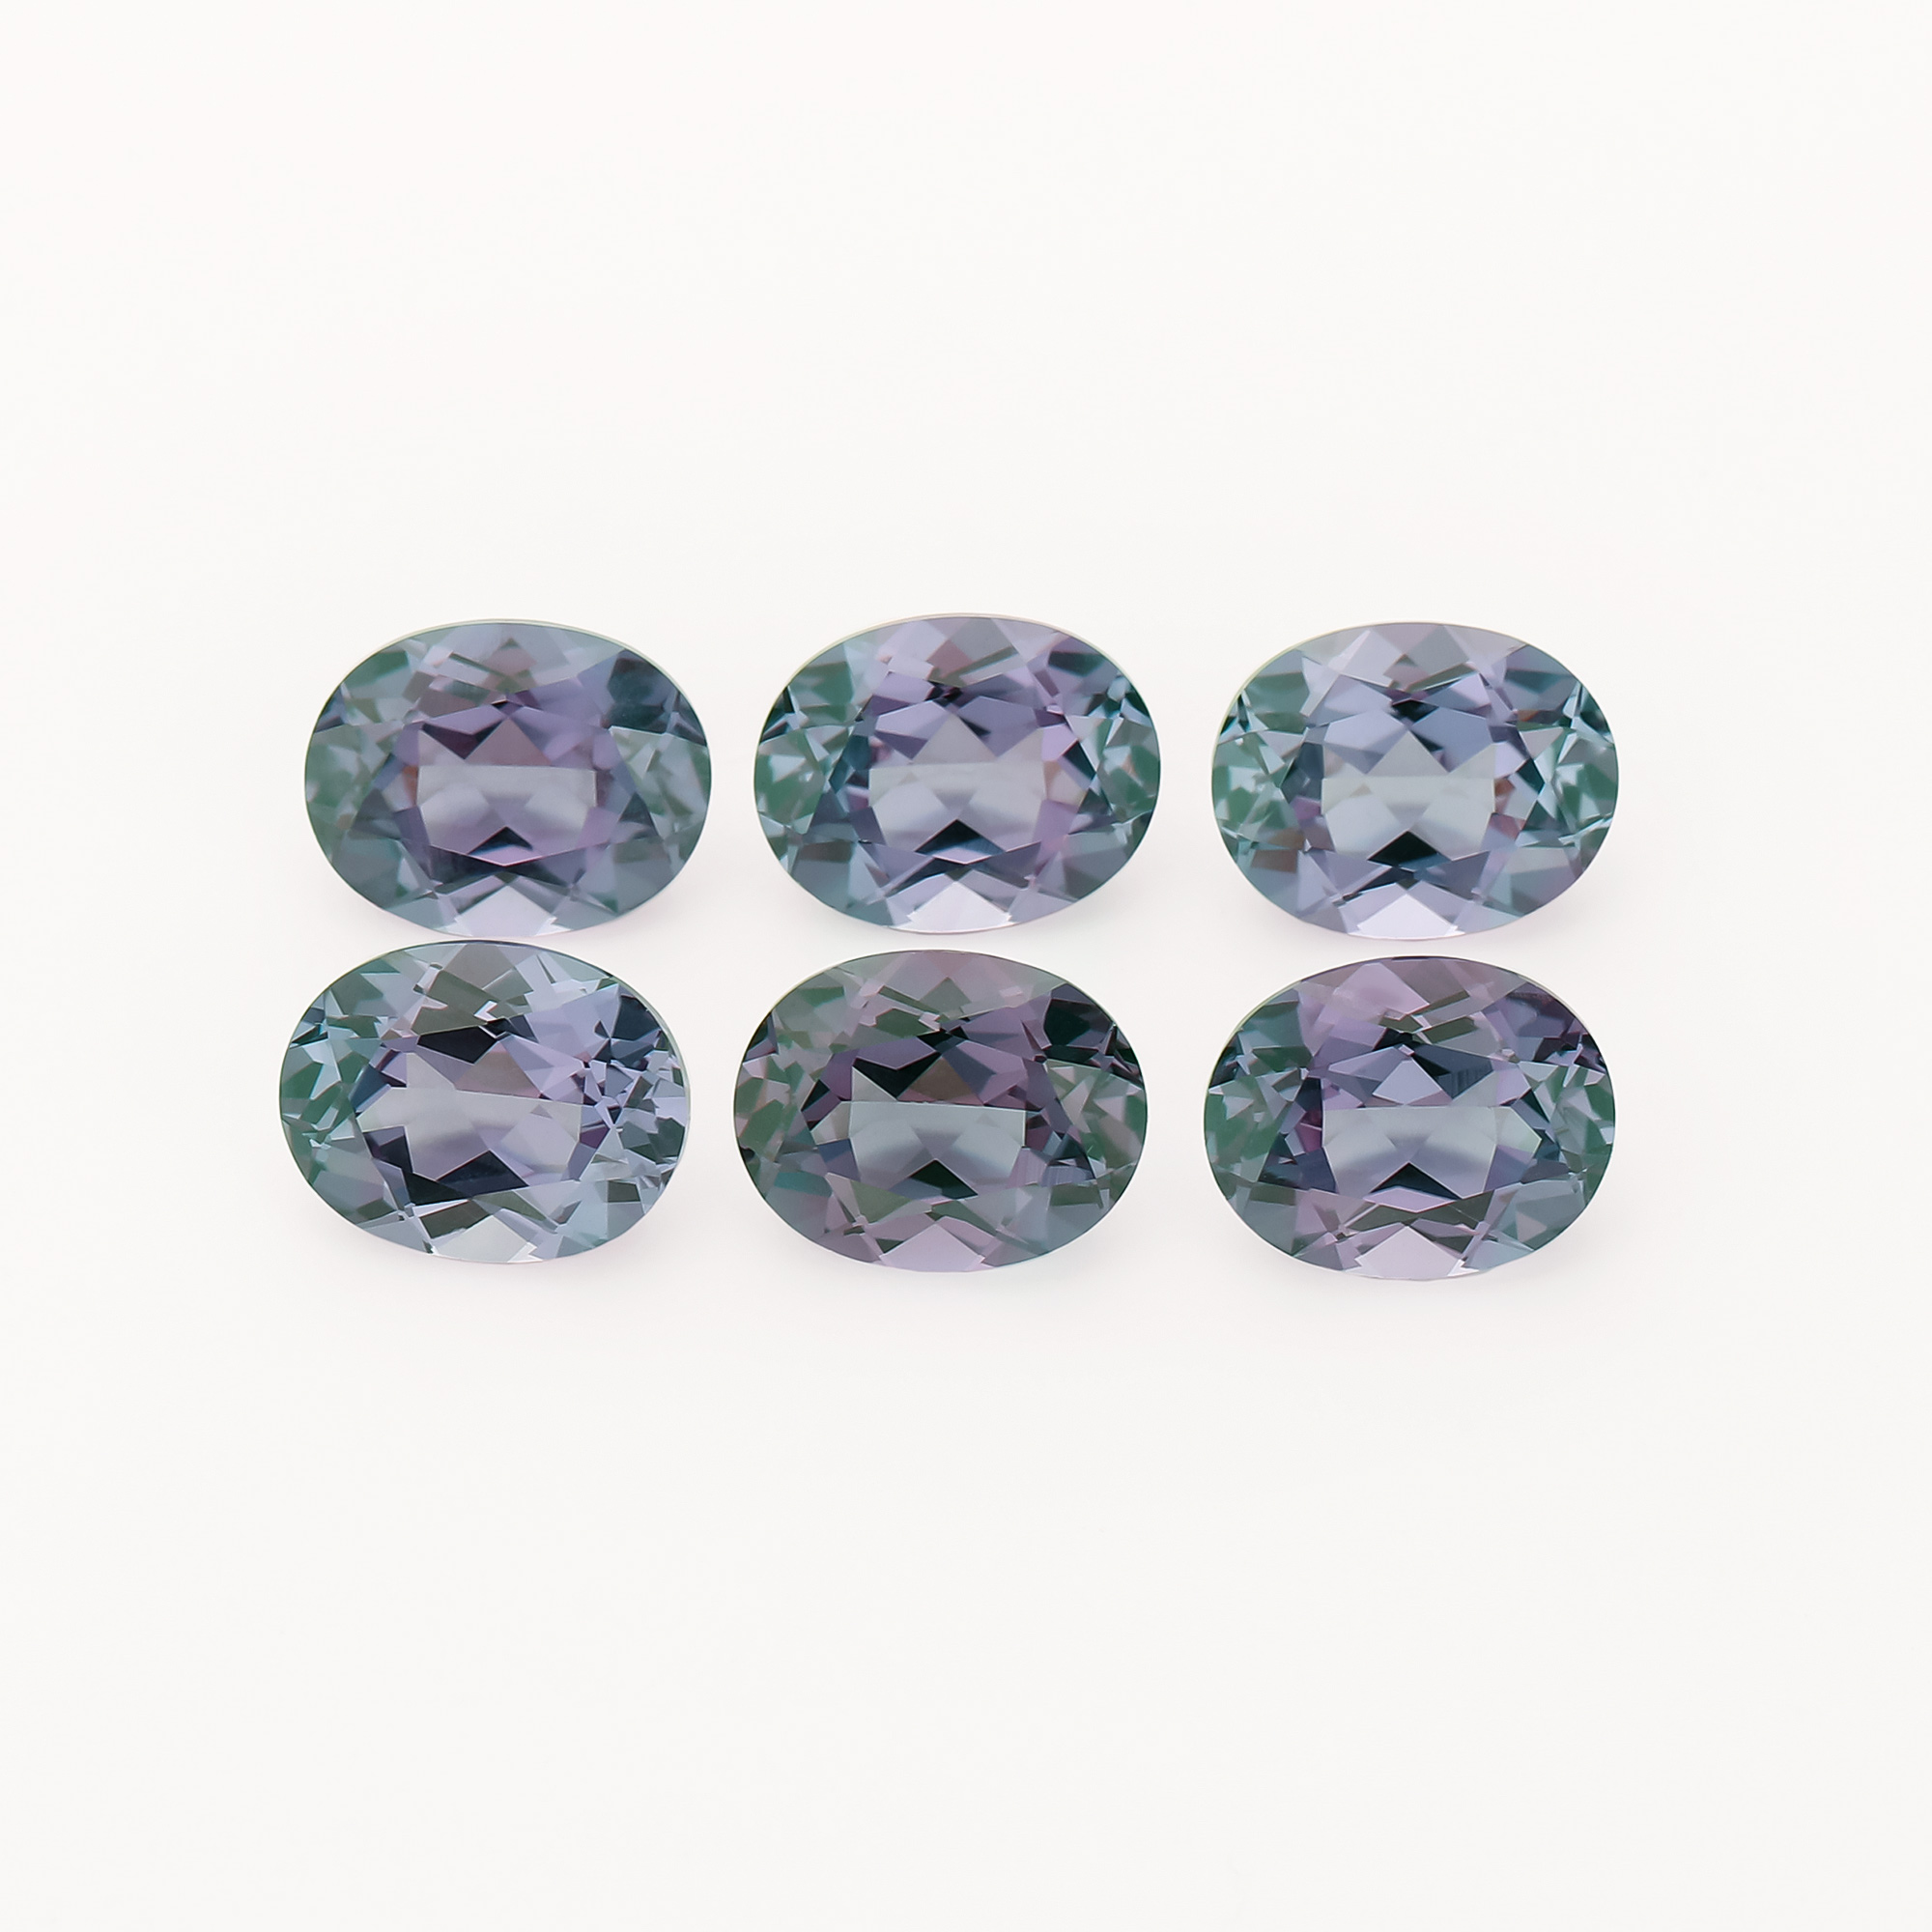 1pcs Simulated Alexandrite Oval Faceted Stone,Color Change Stone,June Birthstone,Unique Gemstone,Loose Stone,DIY Jewelry Supplies 4120145 - Click Image to Close